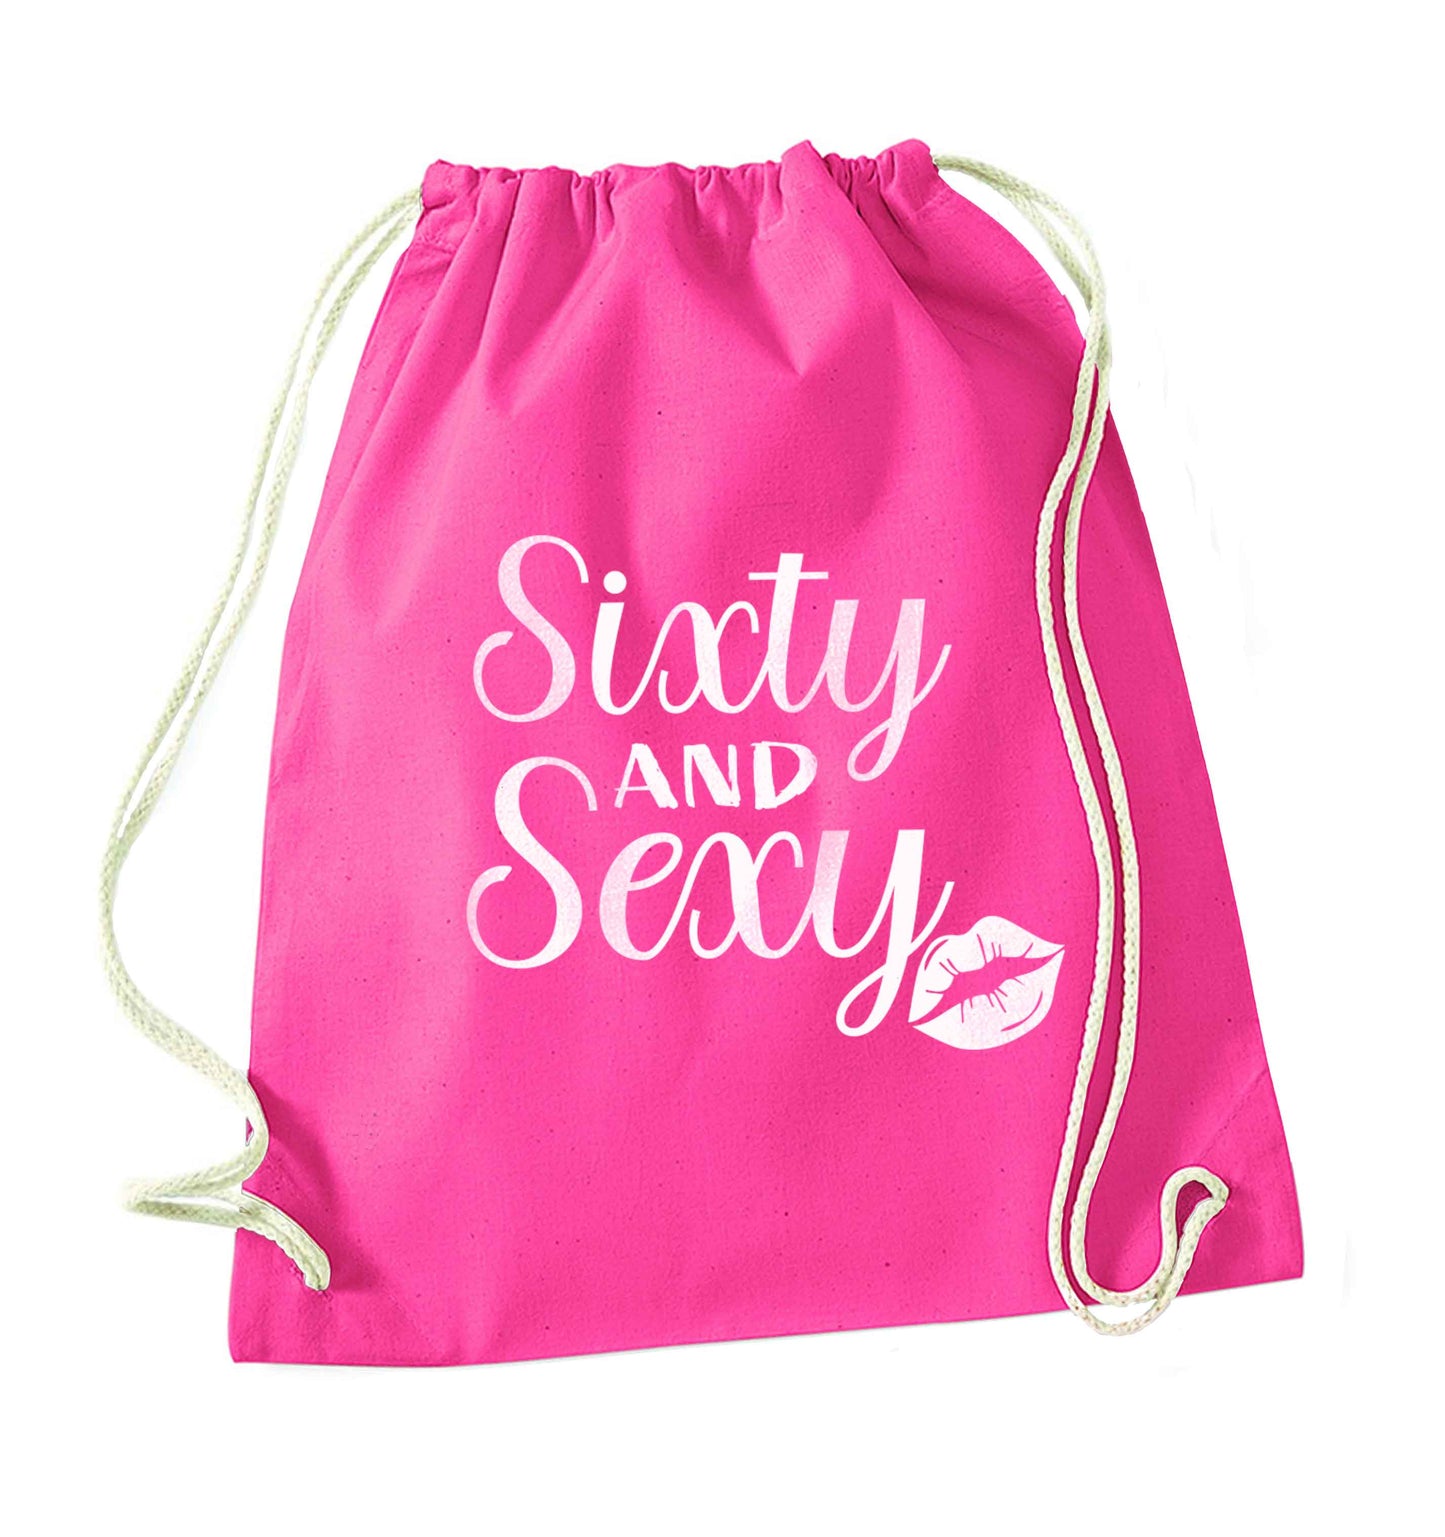 Sixty and sexy pink drawstring bag